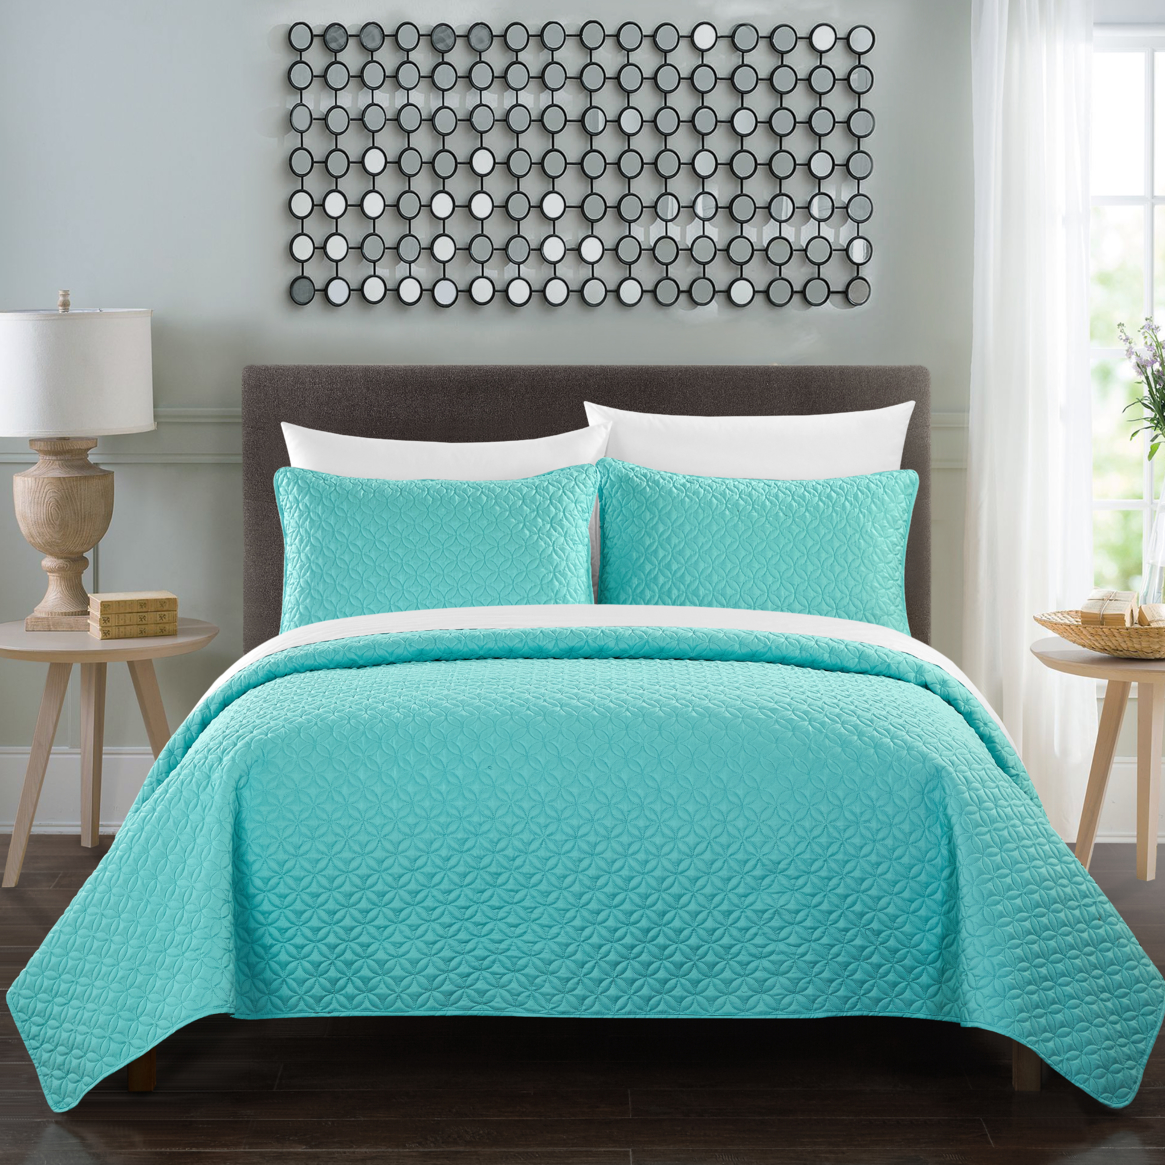 Gideon 7 Or 5 Piece Quilt Cover Set Rose Star Geometric Quilted Bed In A Bag - Sheet Set Decorative Pillow Shams Included - Aqua, King